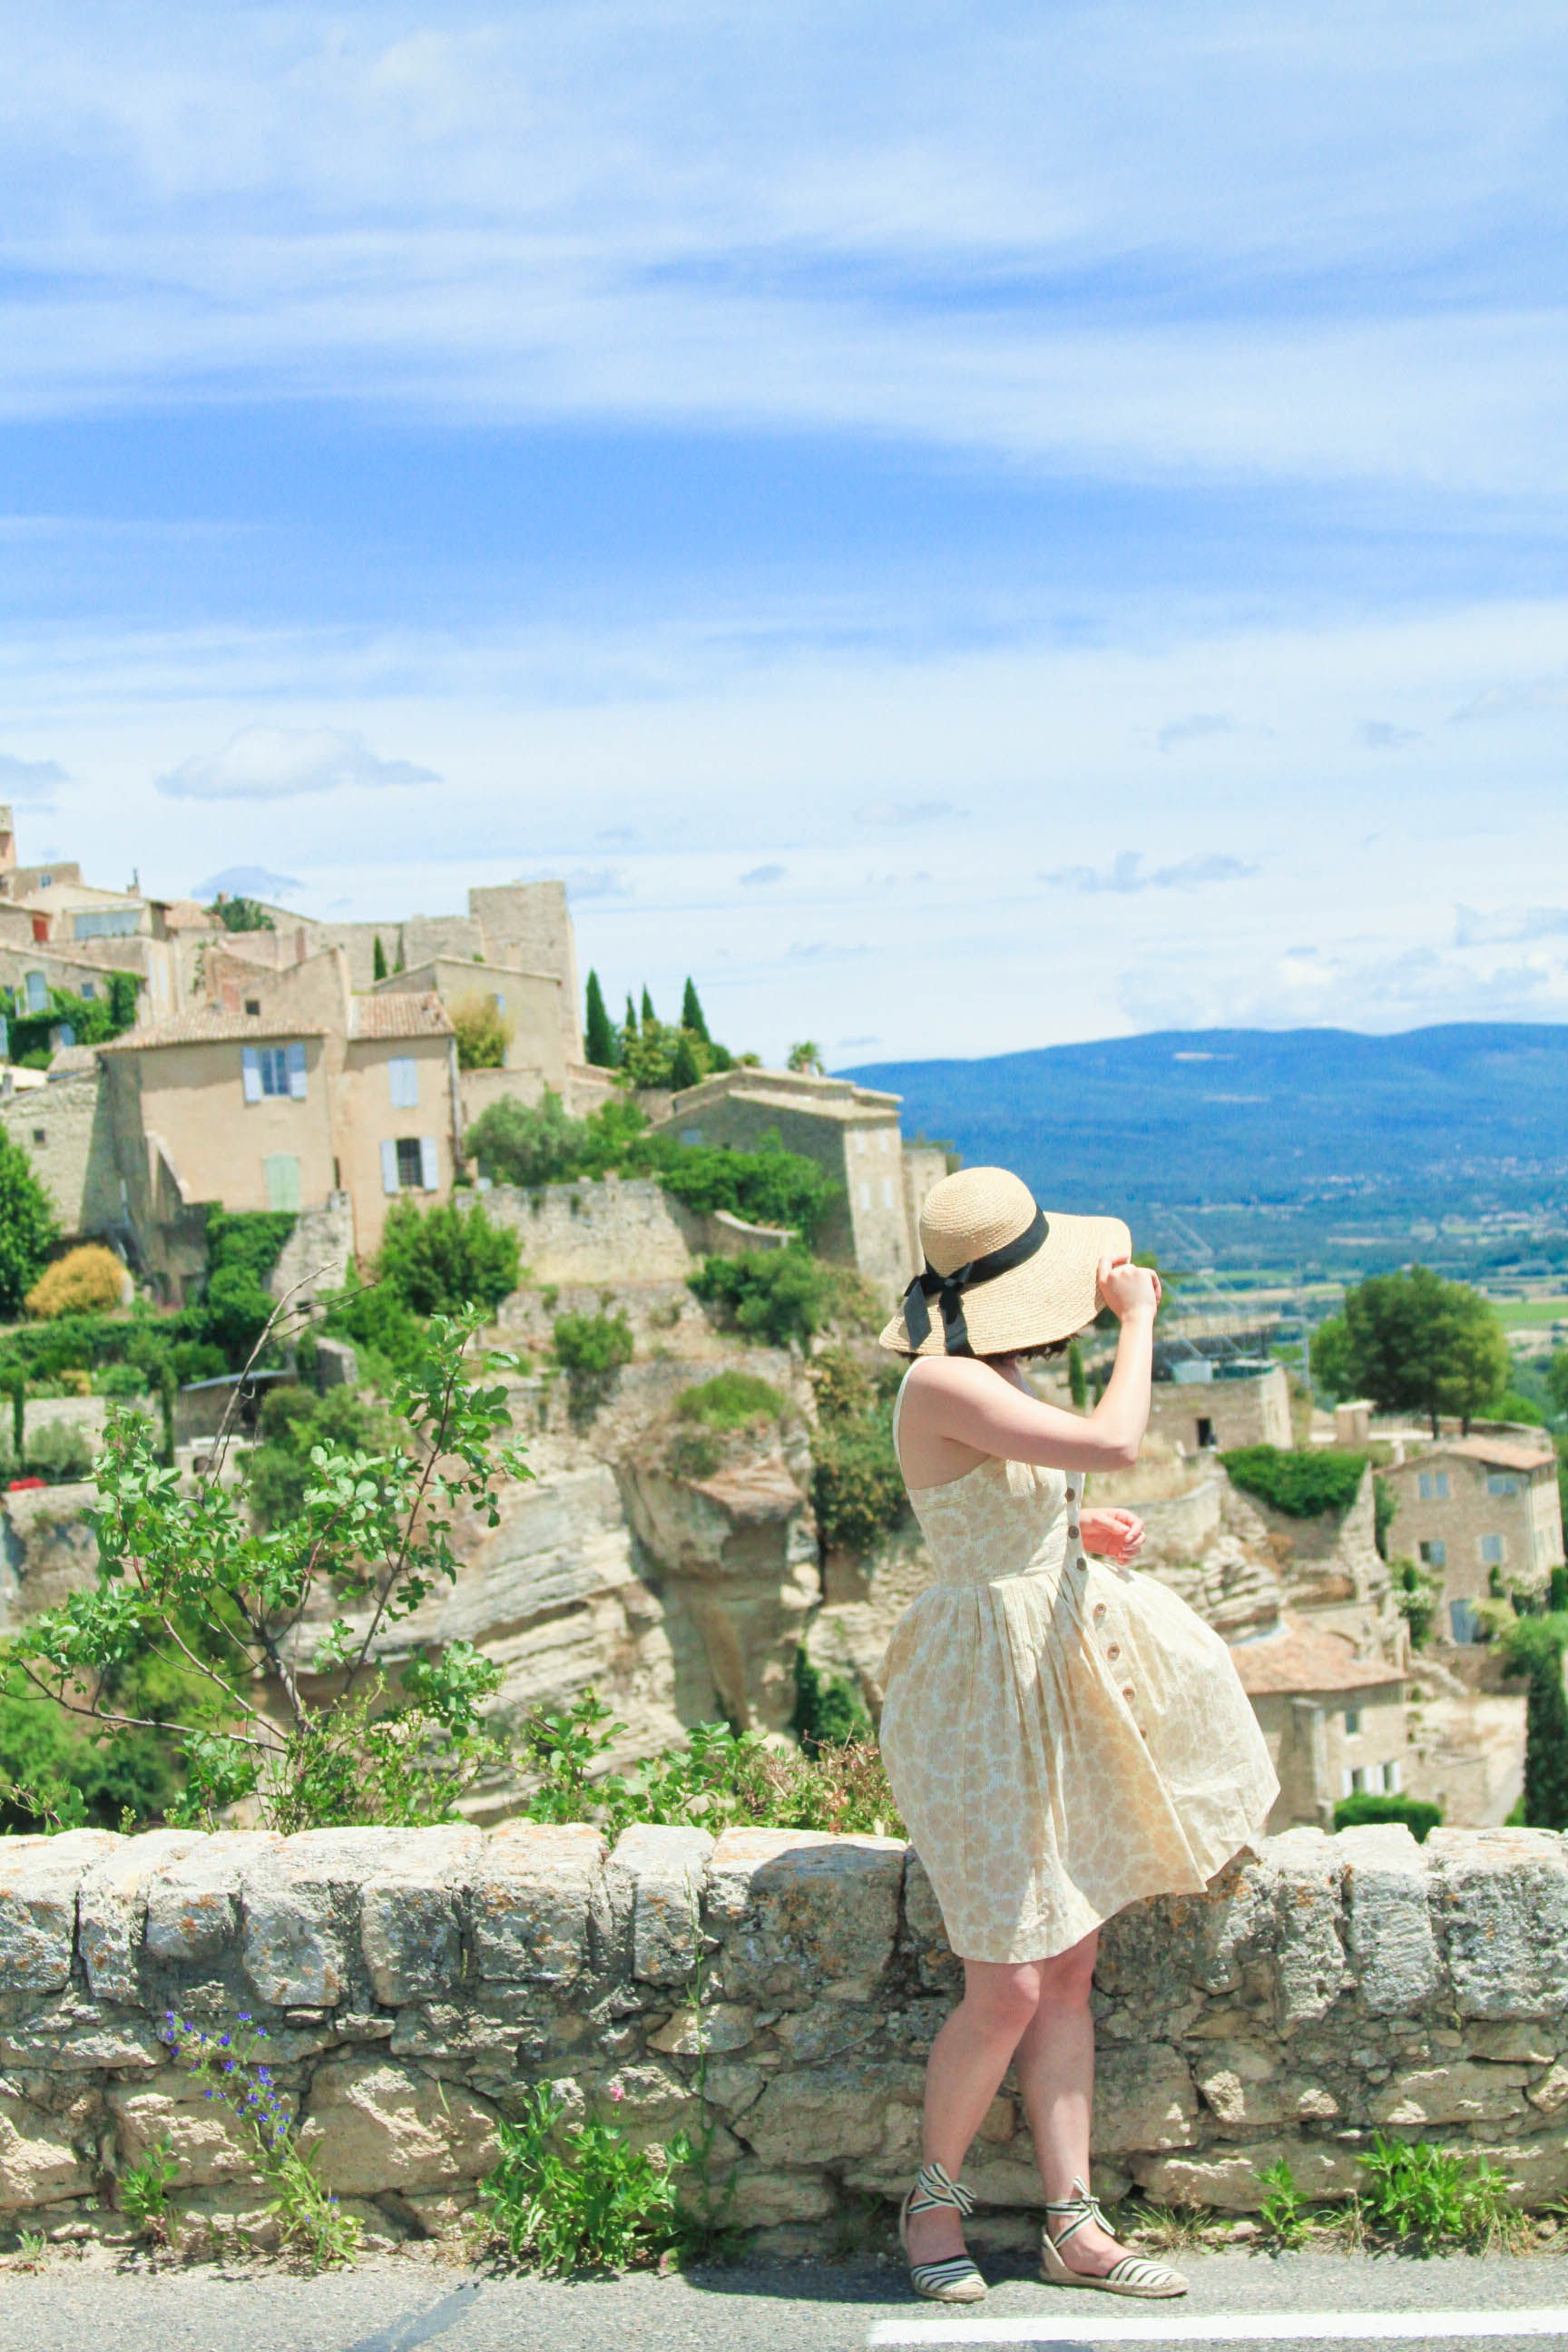 "I think it's a rule that, when driving up the hill into Gordes, everyone must stop and take photos at least once...." | #mfrancisdesigntravels